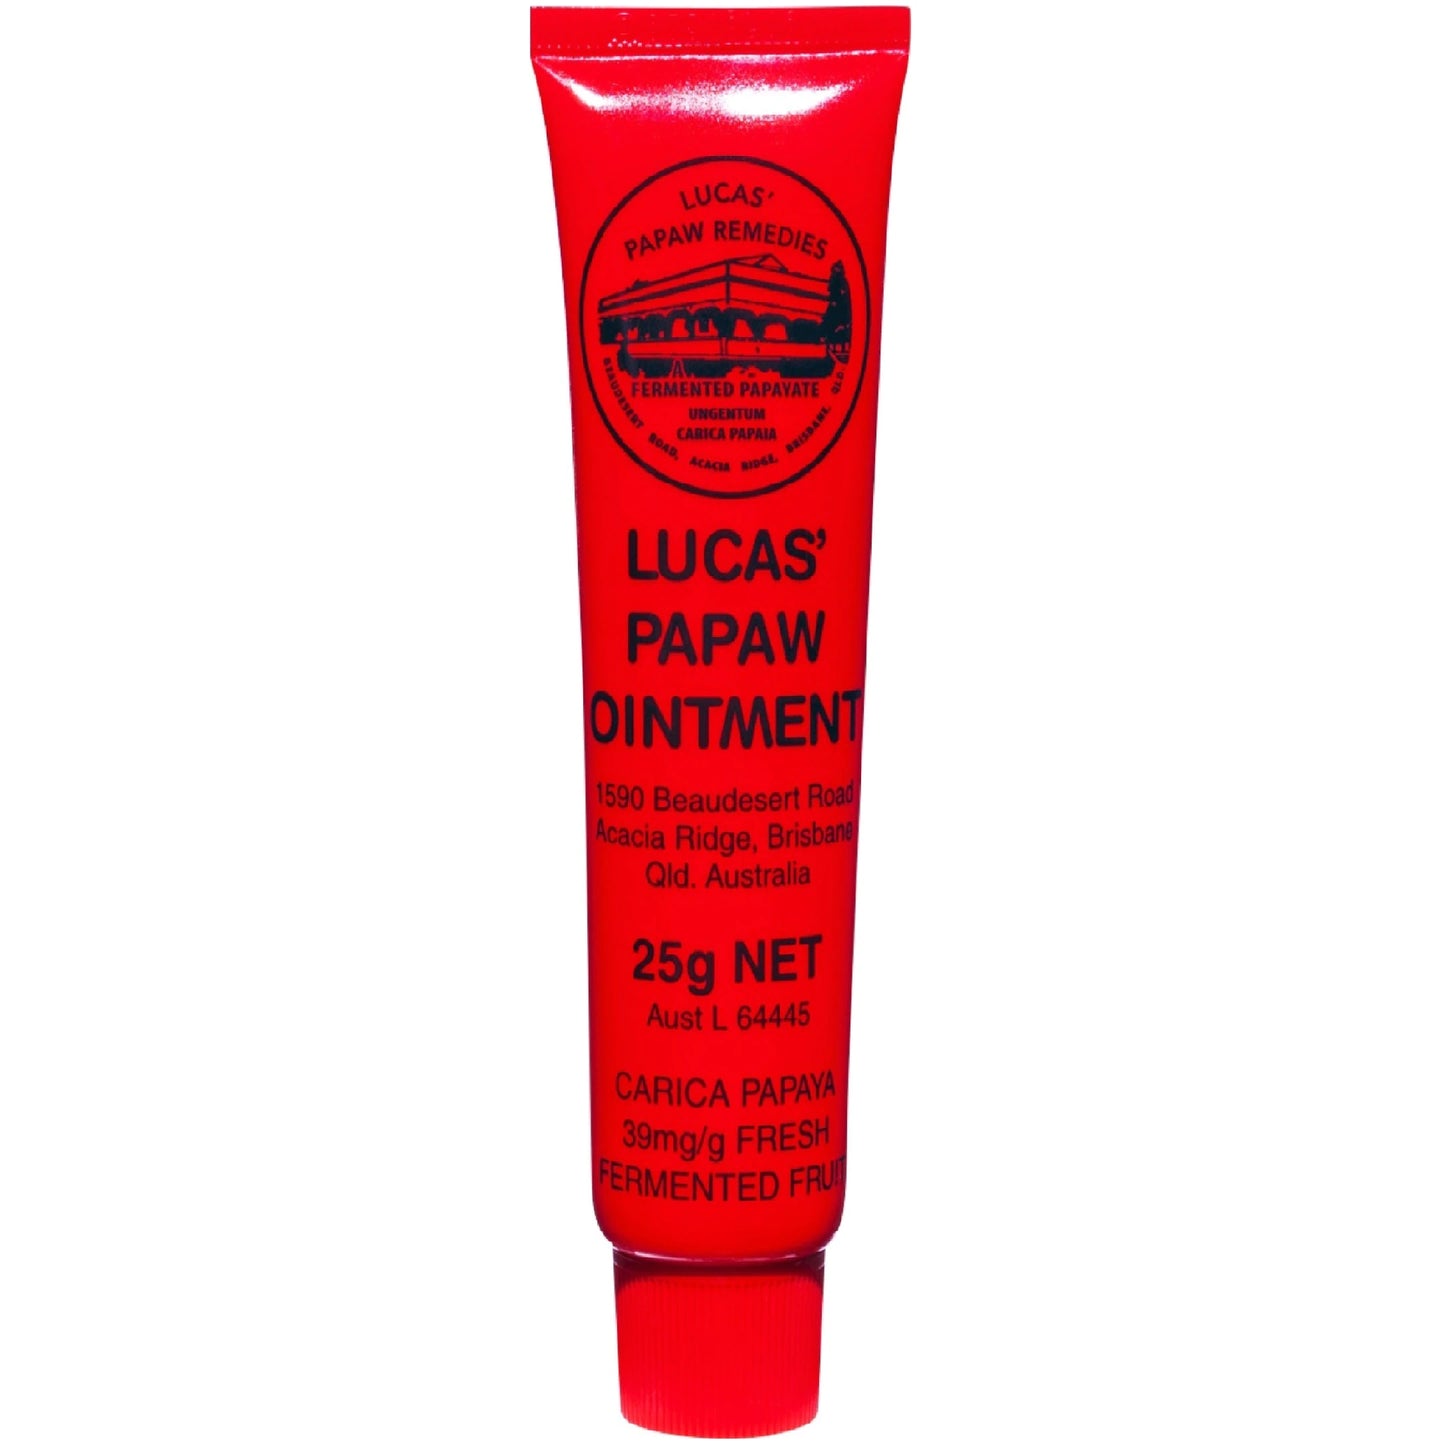 Lucas Papaw Ointment (25 G)